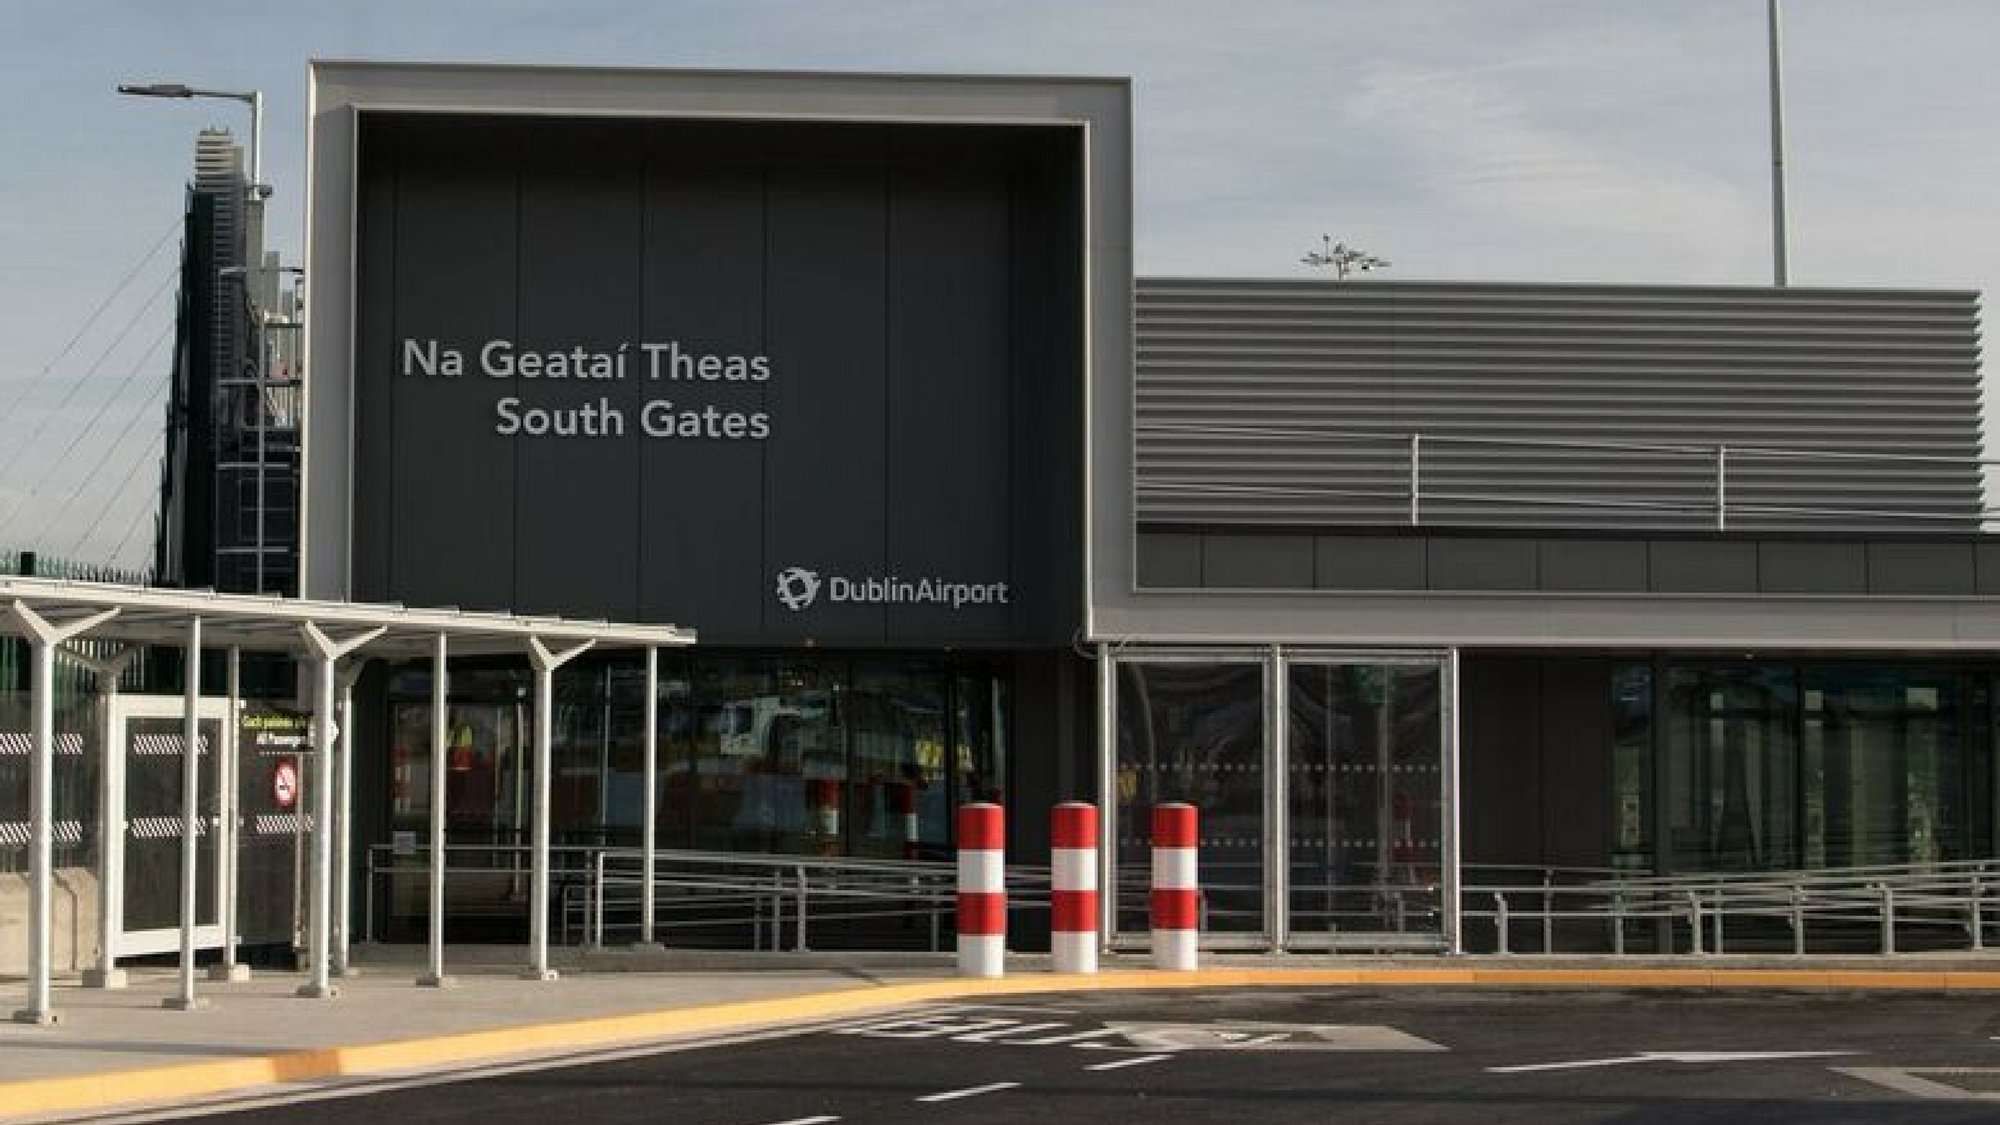 Exterior of South Gates building at Dublin Airport